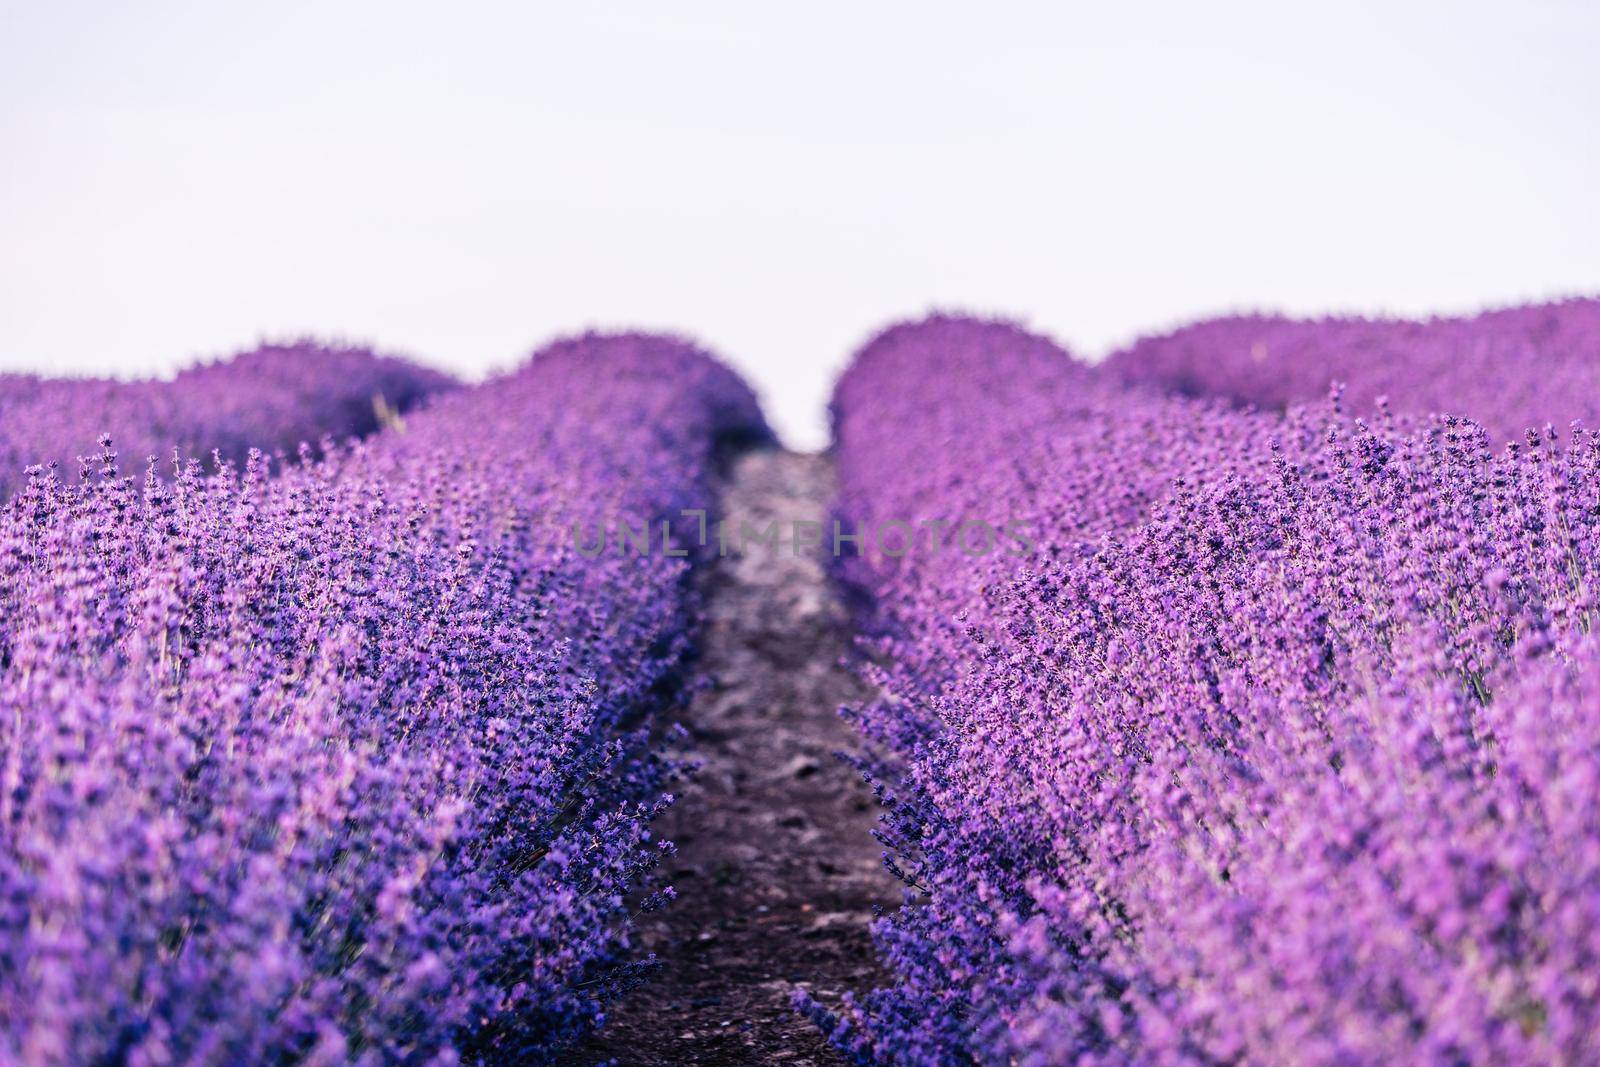 Lavender flower blooming scented fields in endless rows. Selective focus on Bushes of lavender purple aromatic flowers at lavender field. Abstract blur for background. by panophotograph